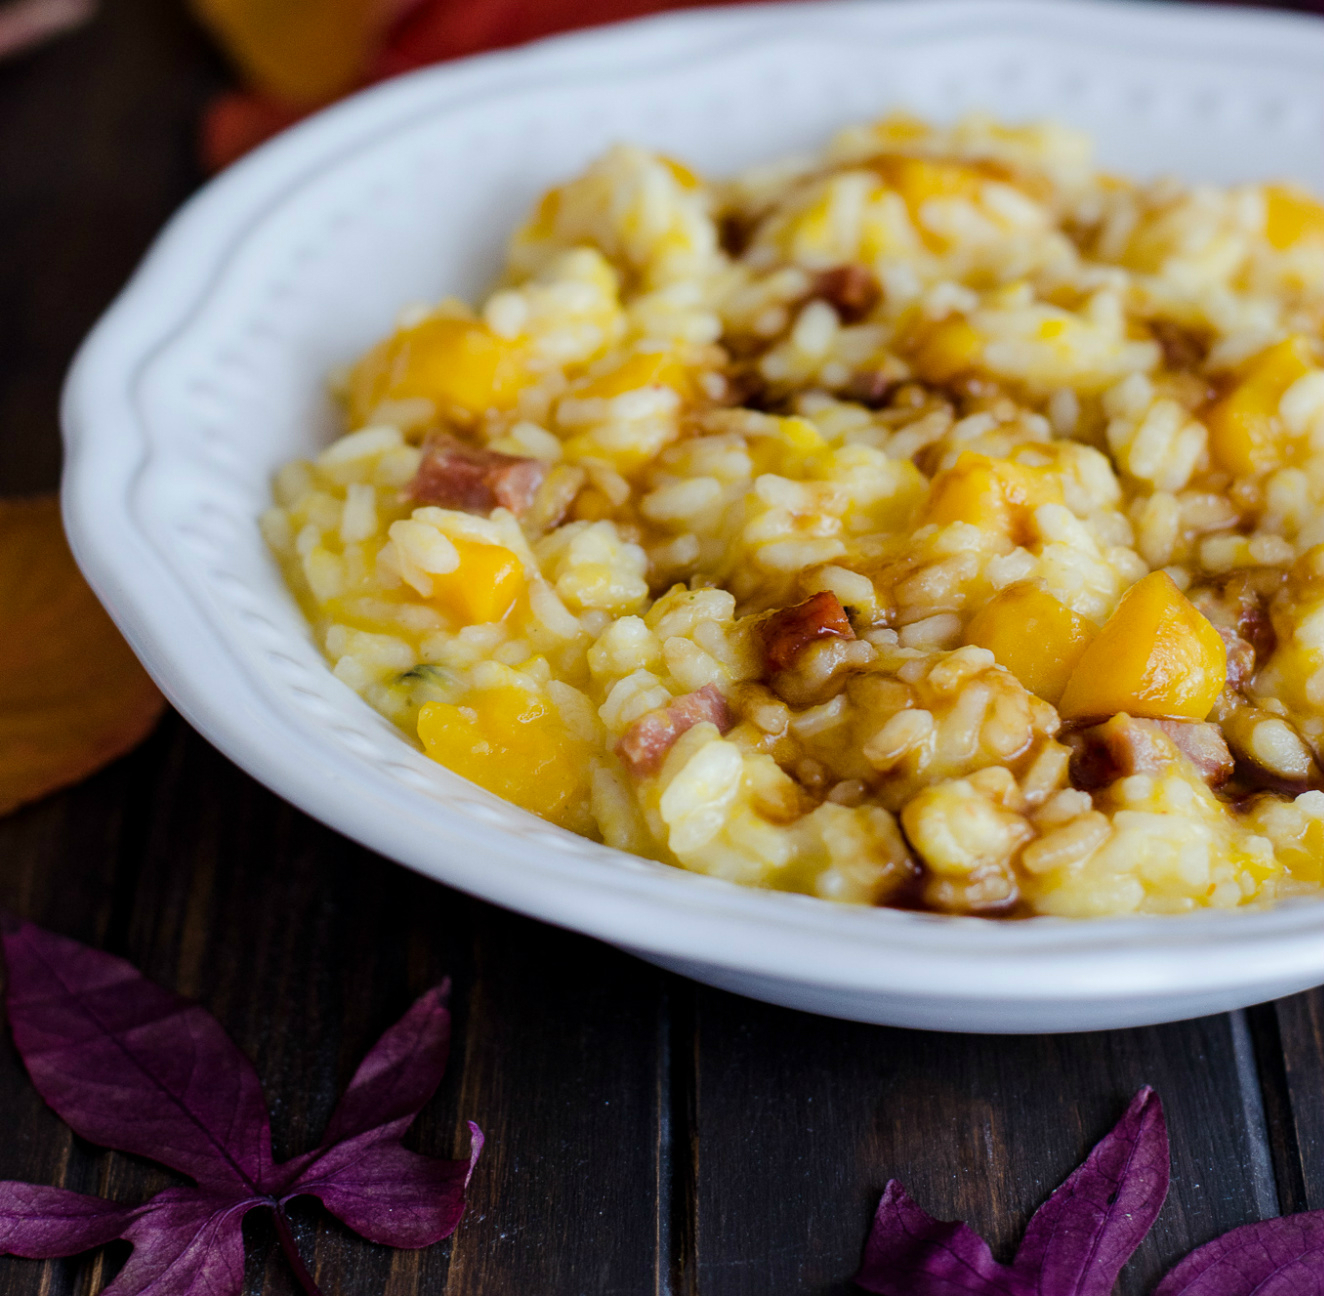 Creamy Pumpkin-Bacon Risotto With Caramelized Balsamic Vinegar